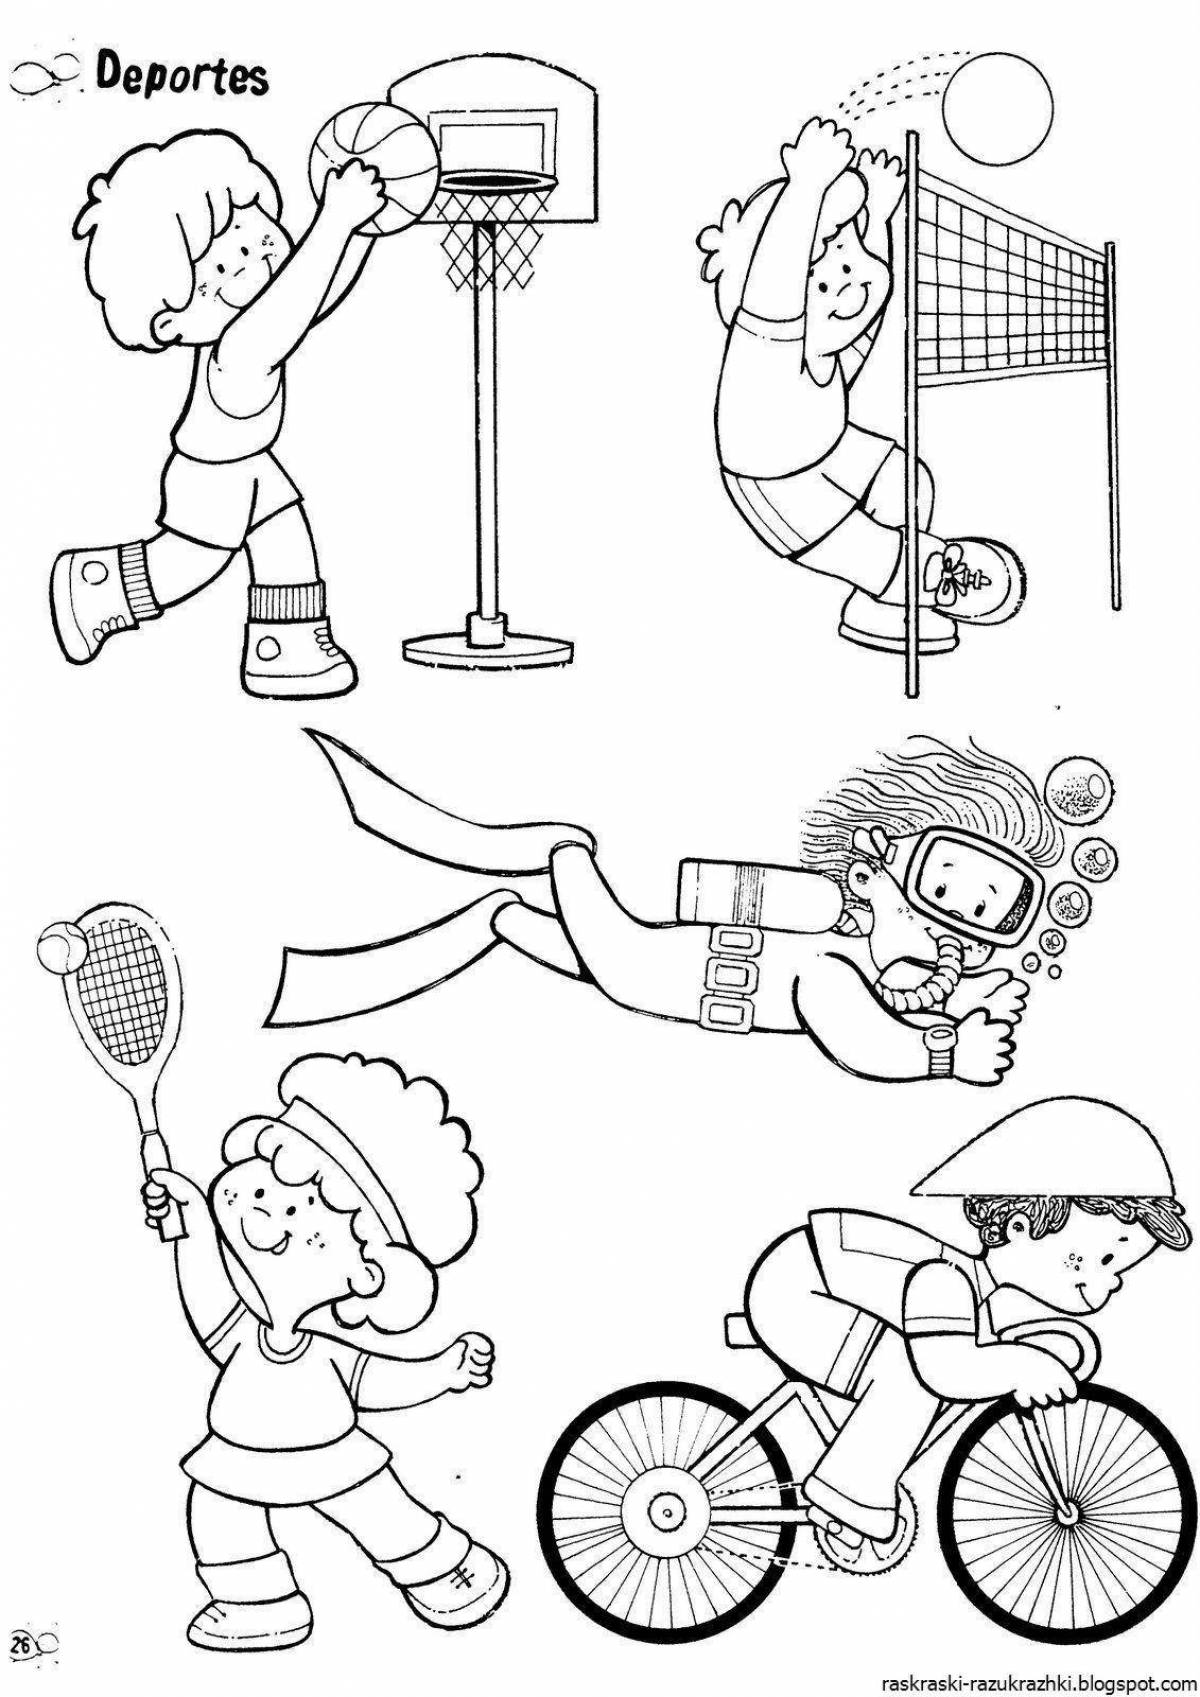 Amazing sports coloring pages for kids